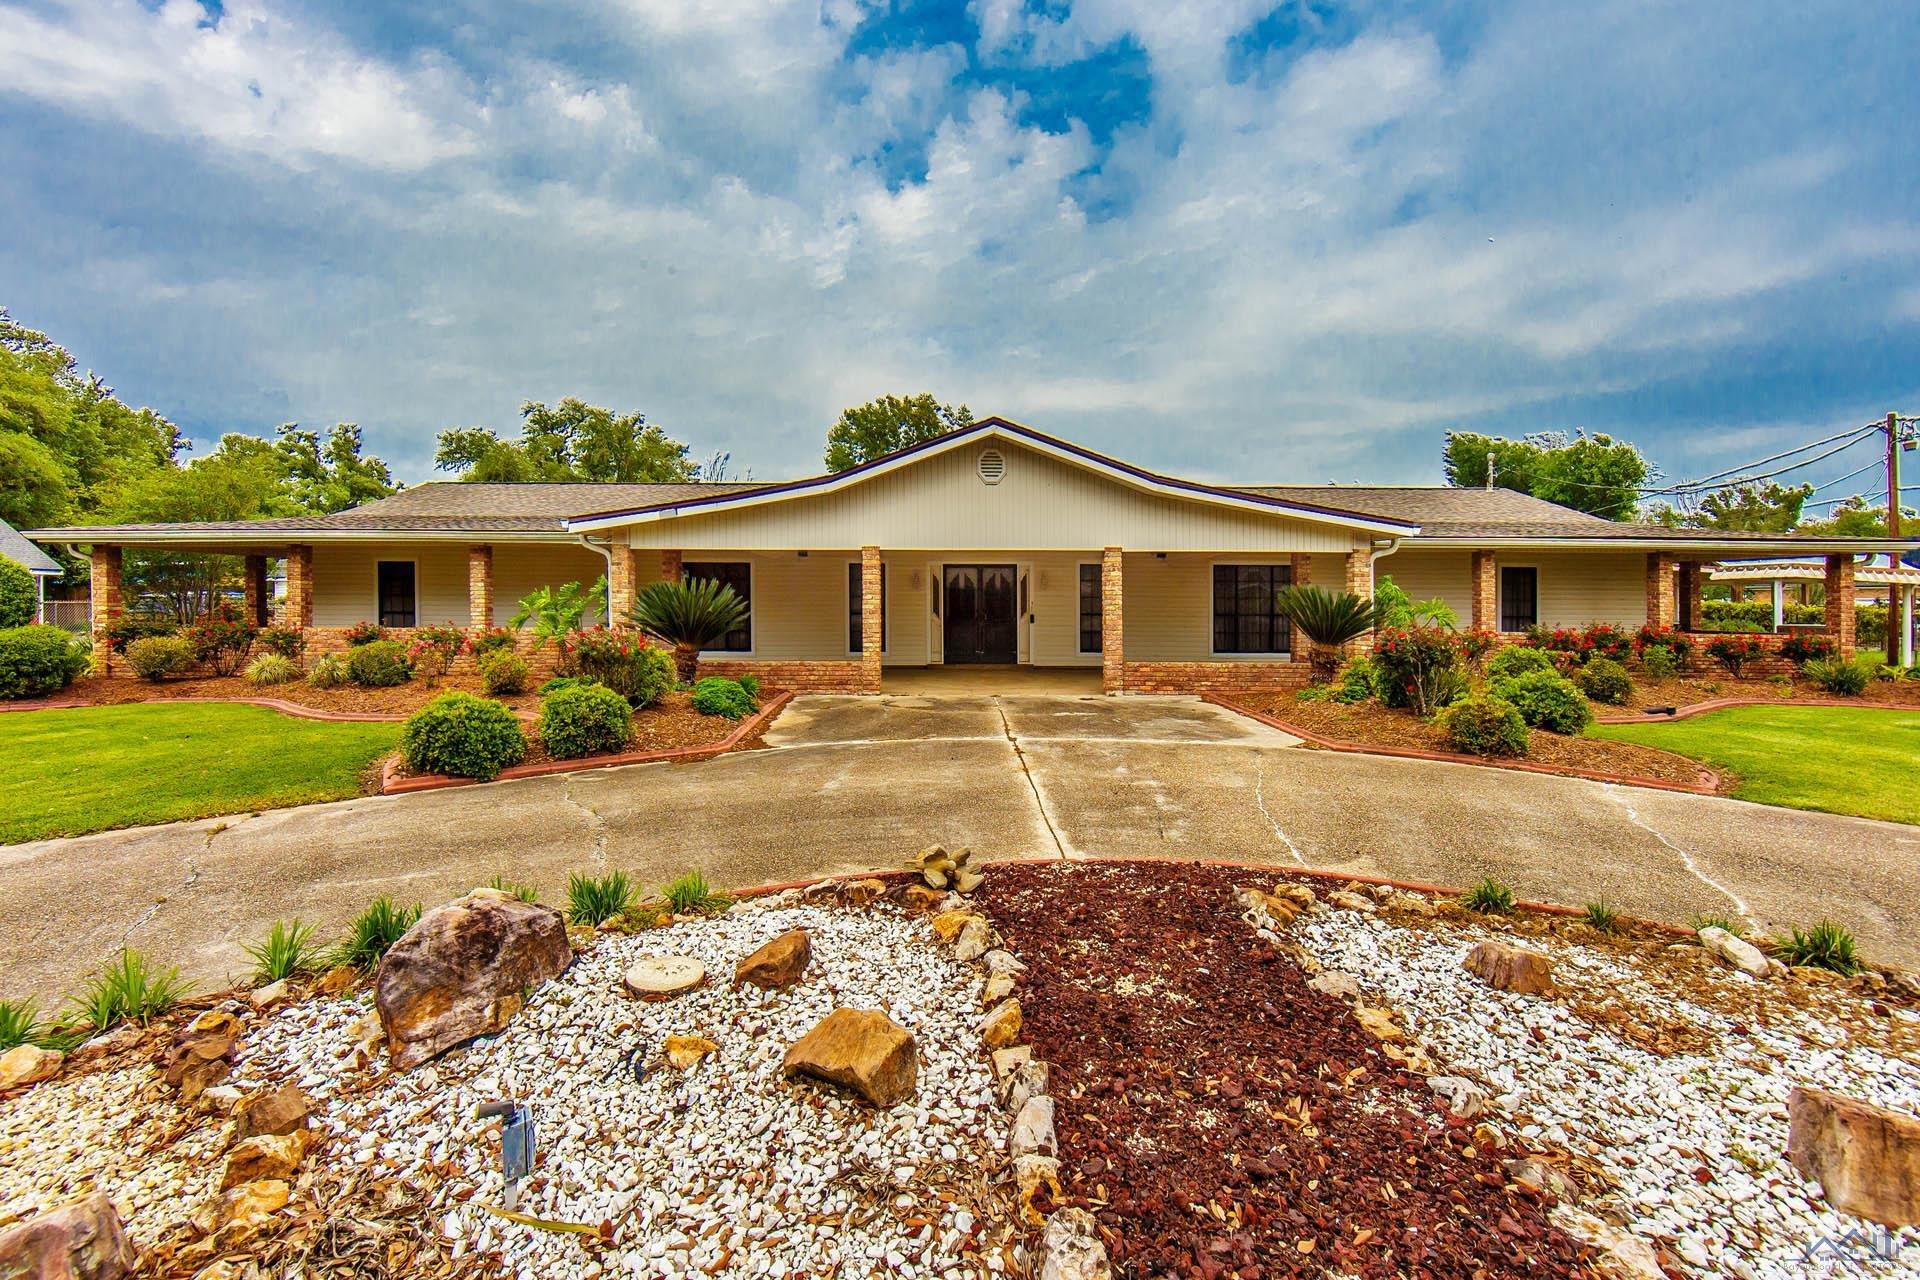 4145 COUNTRY DR, Bourg, LA 